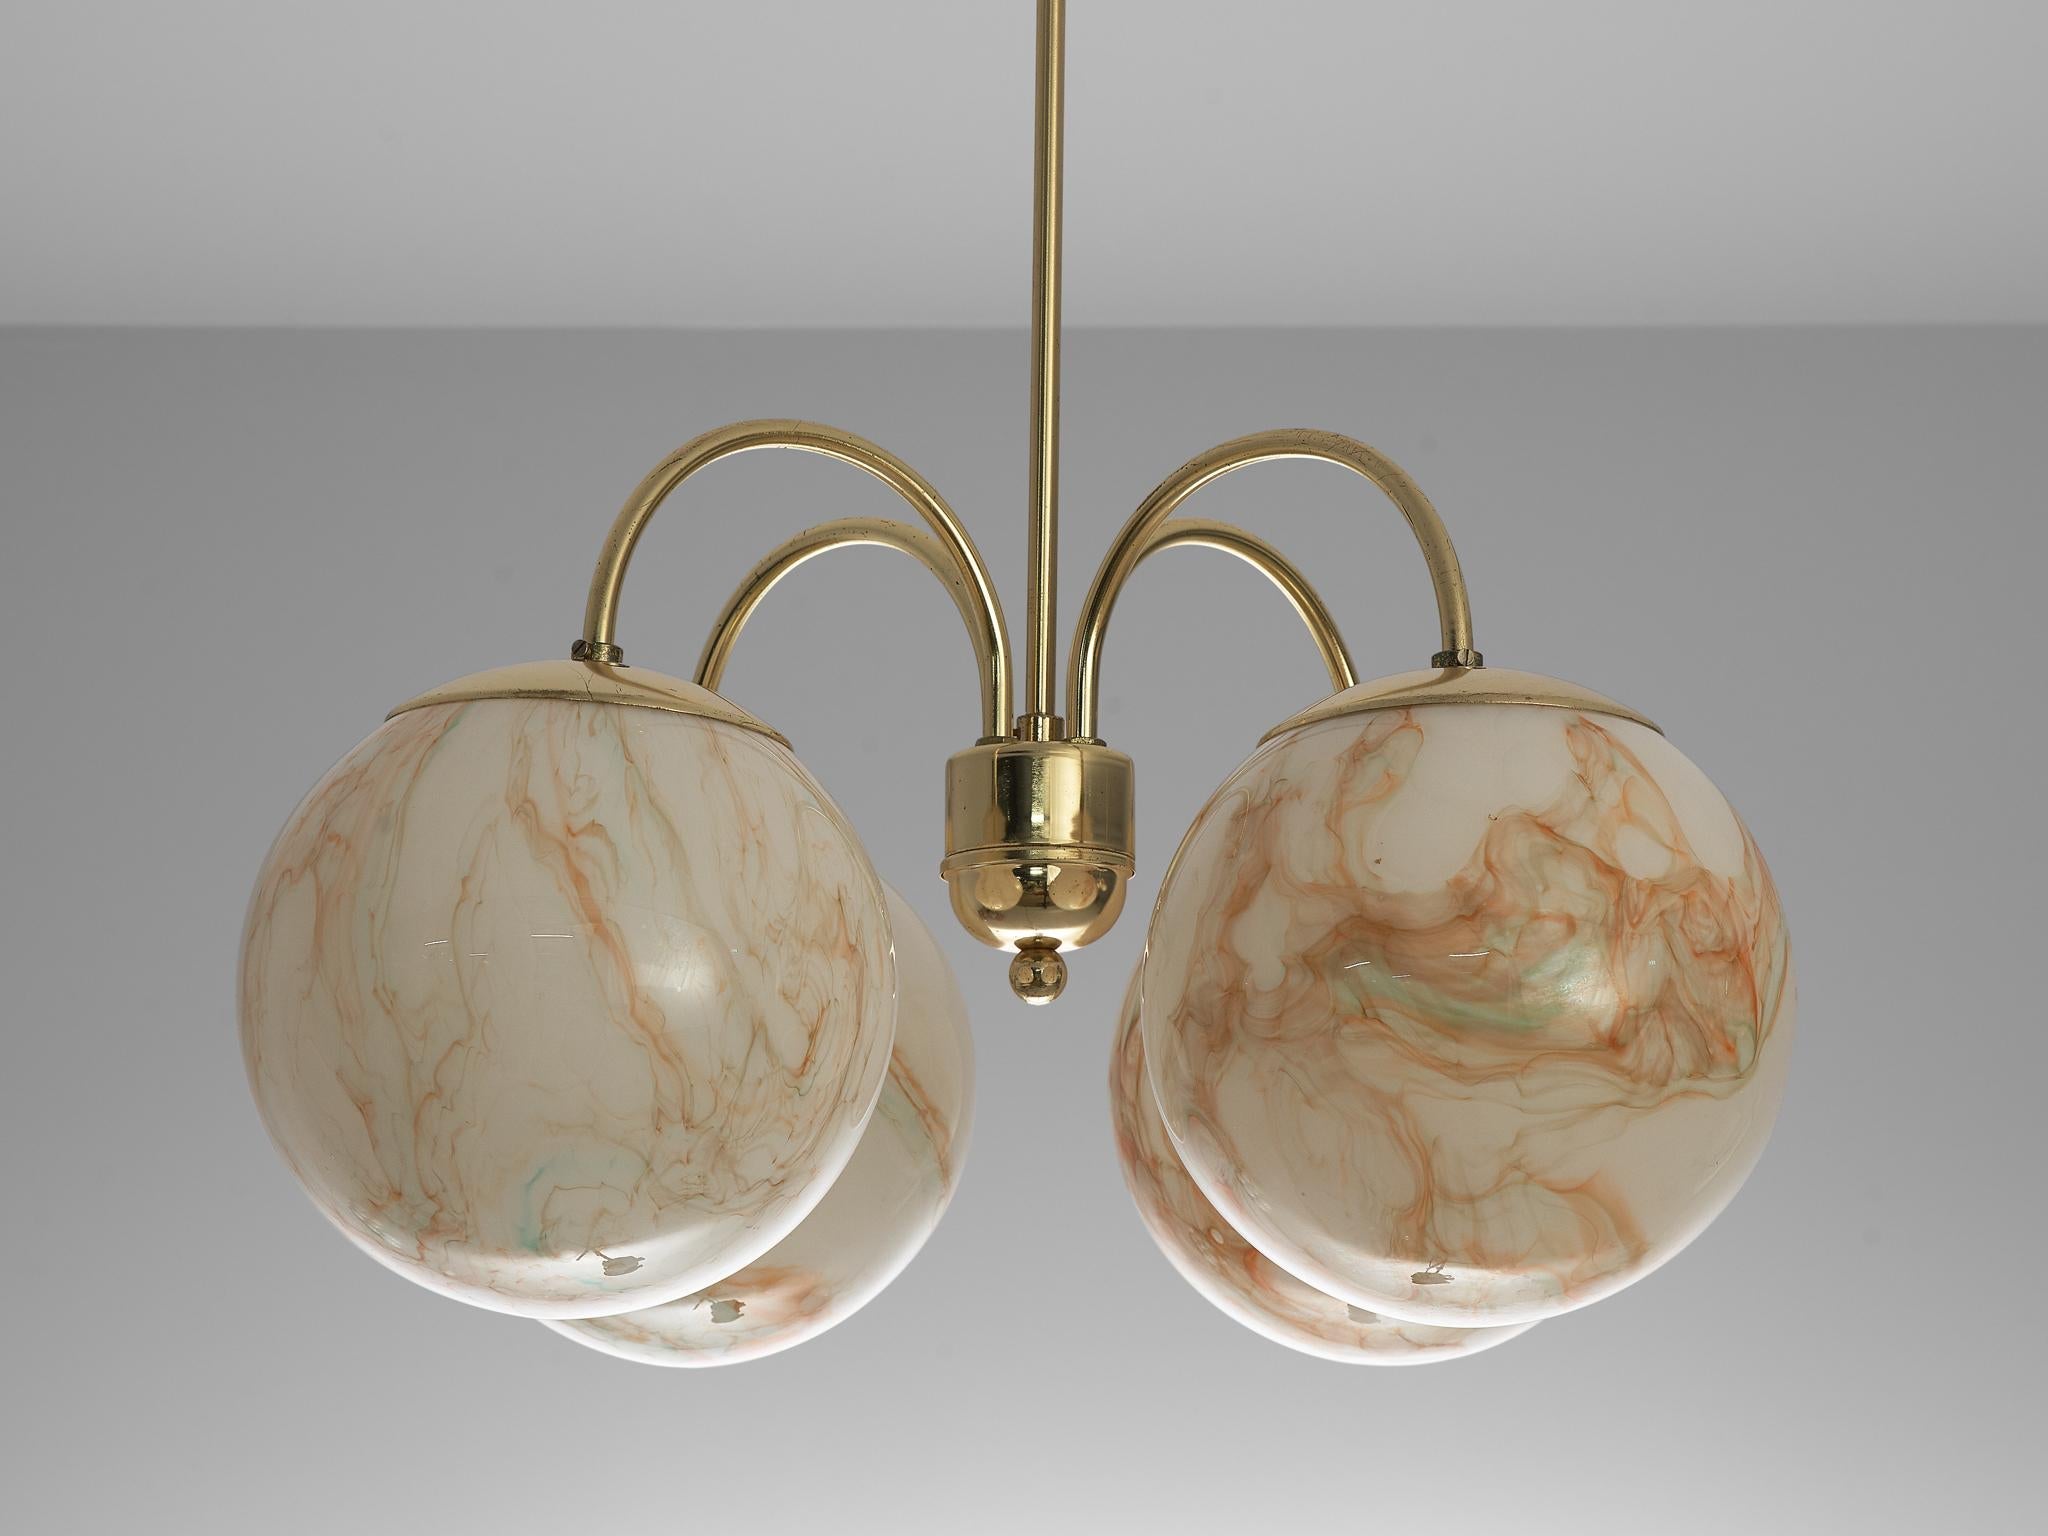 Chandelier with Brown Orange Marbled Glass Spheres and Brass